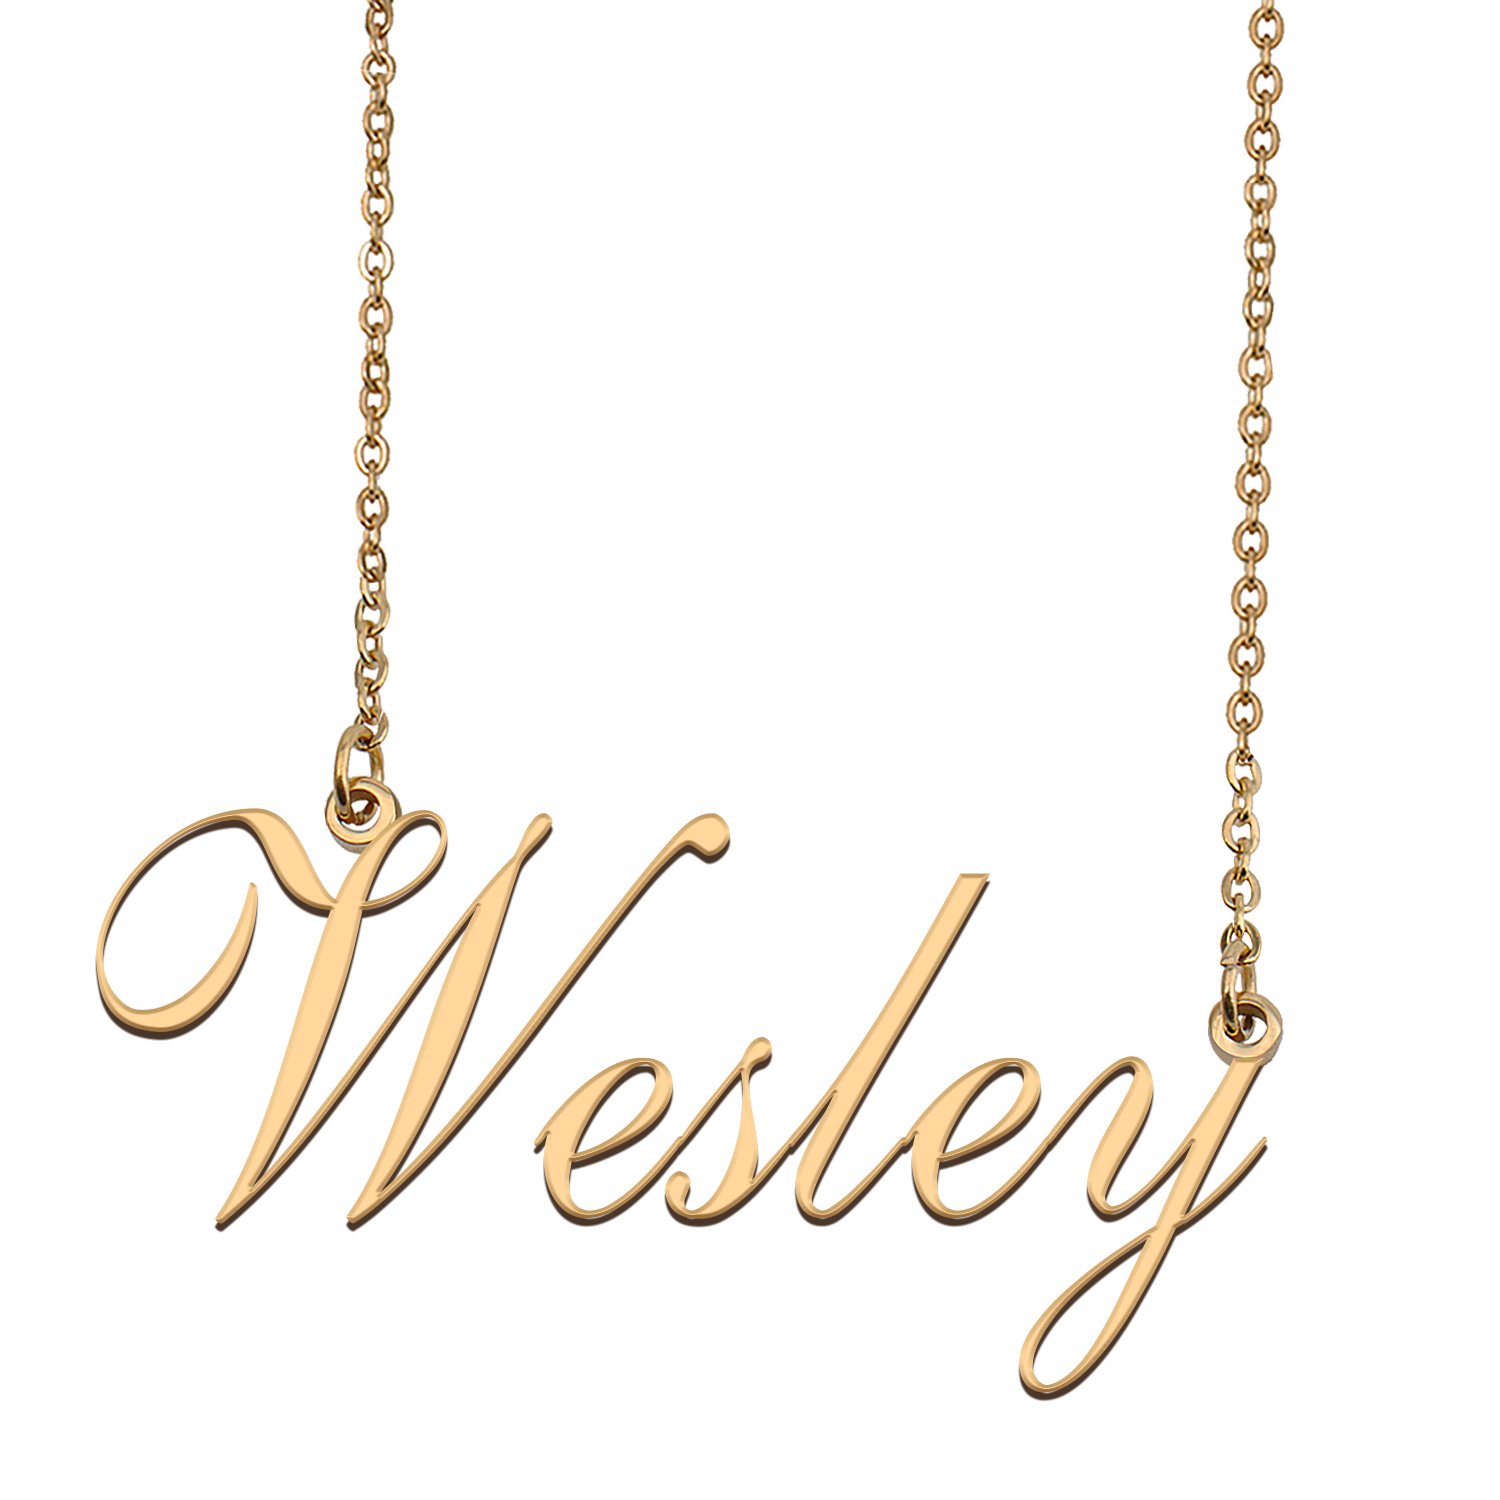 Custom Personalized Name Necklace in Golden Silver for Women Wesley